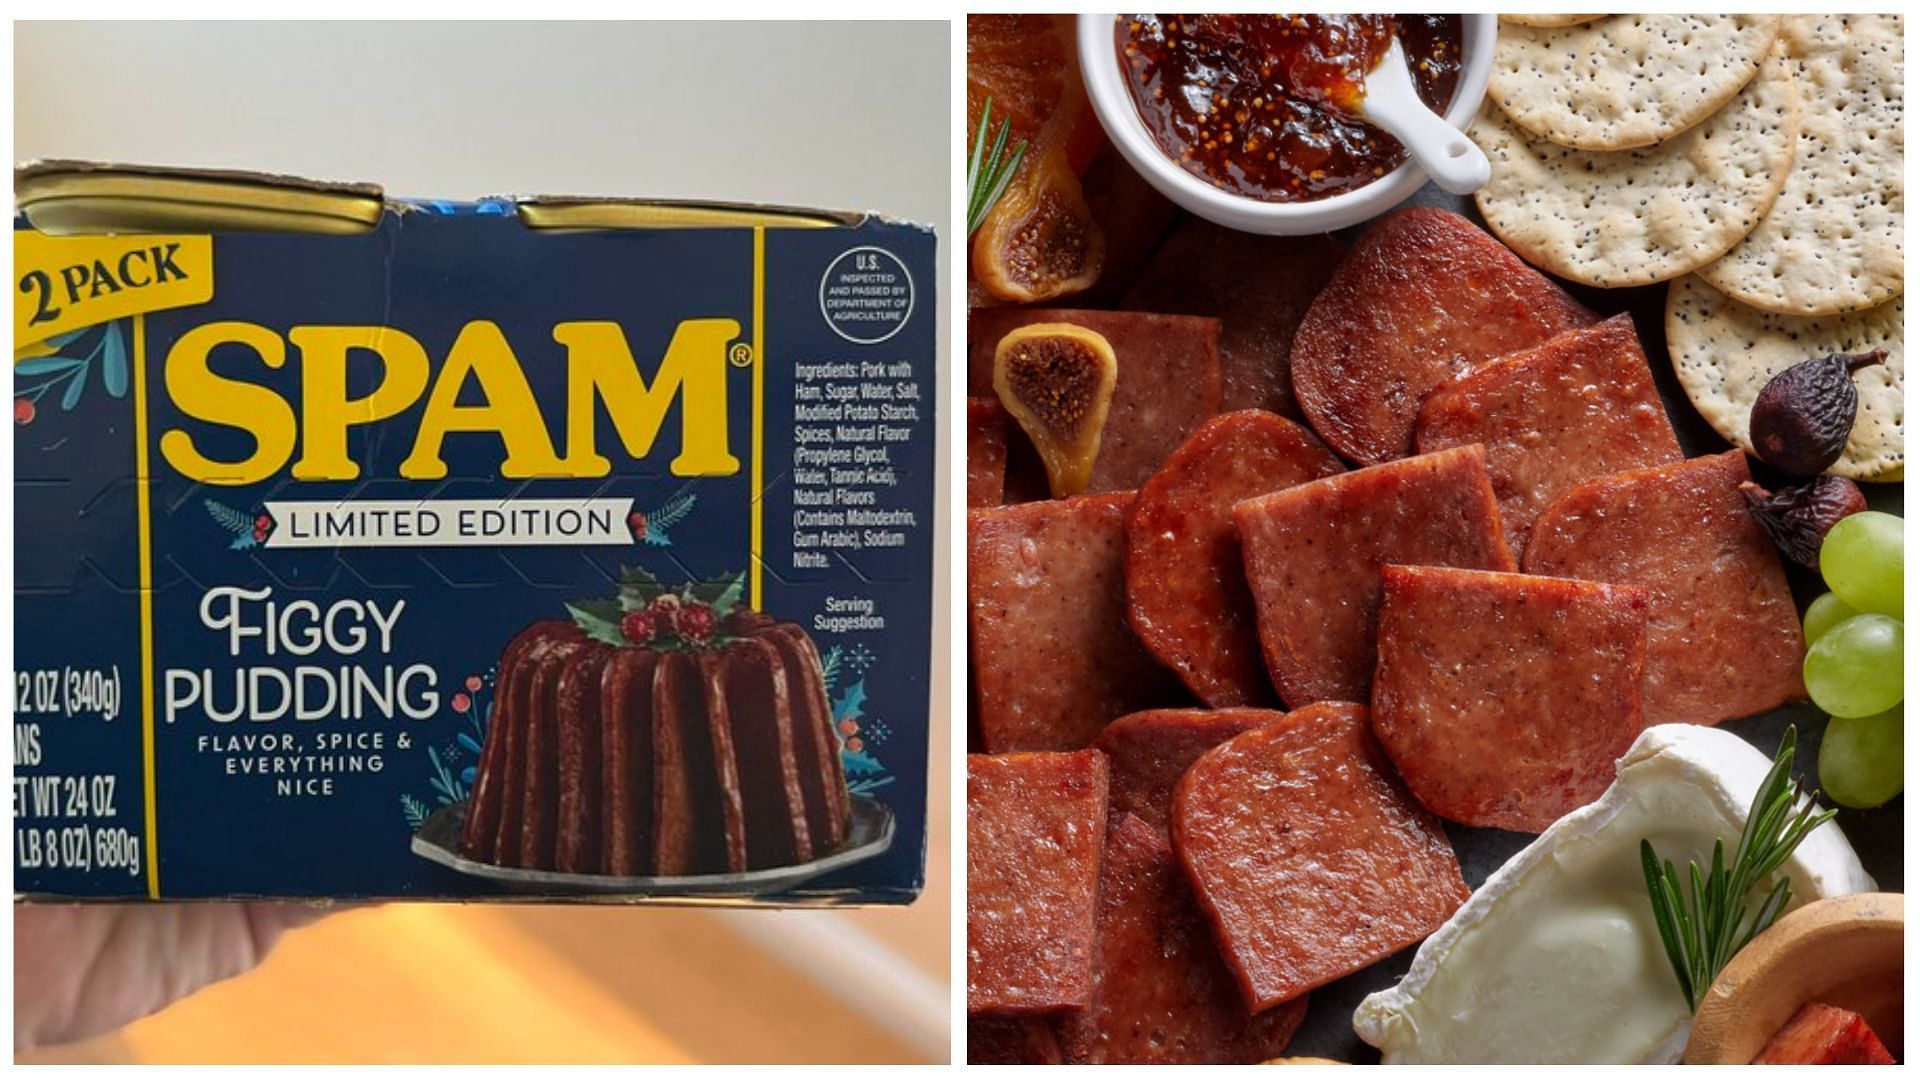 Start your holiday season with Spam Figgy Pudding (Image via SPAM/Twitter/FatKidsDeals)